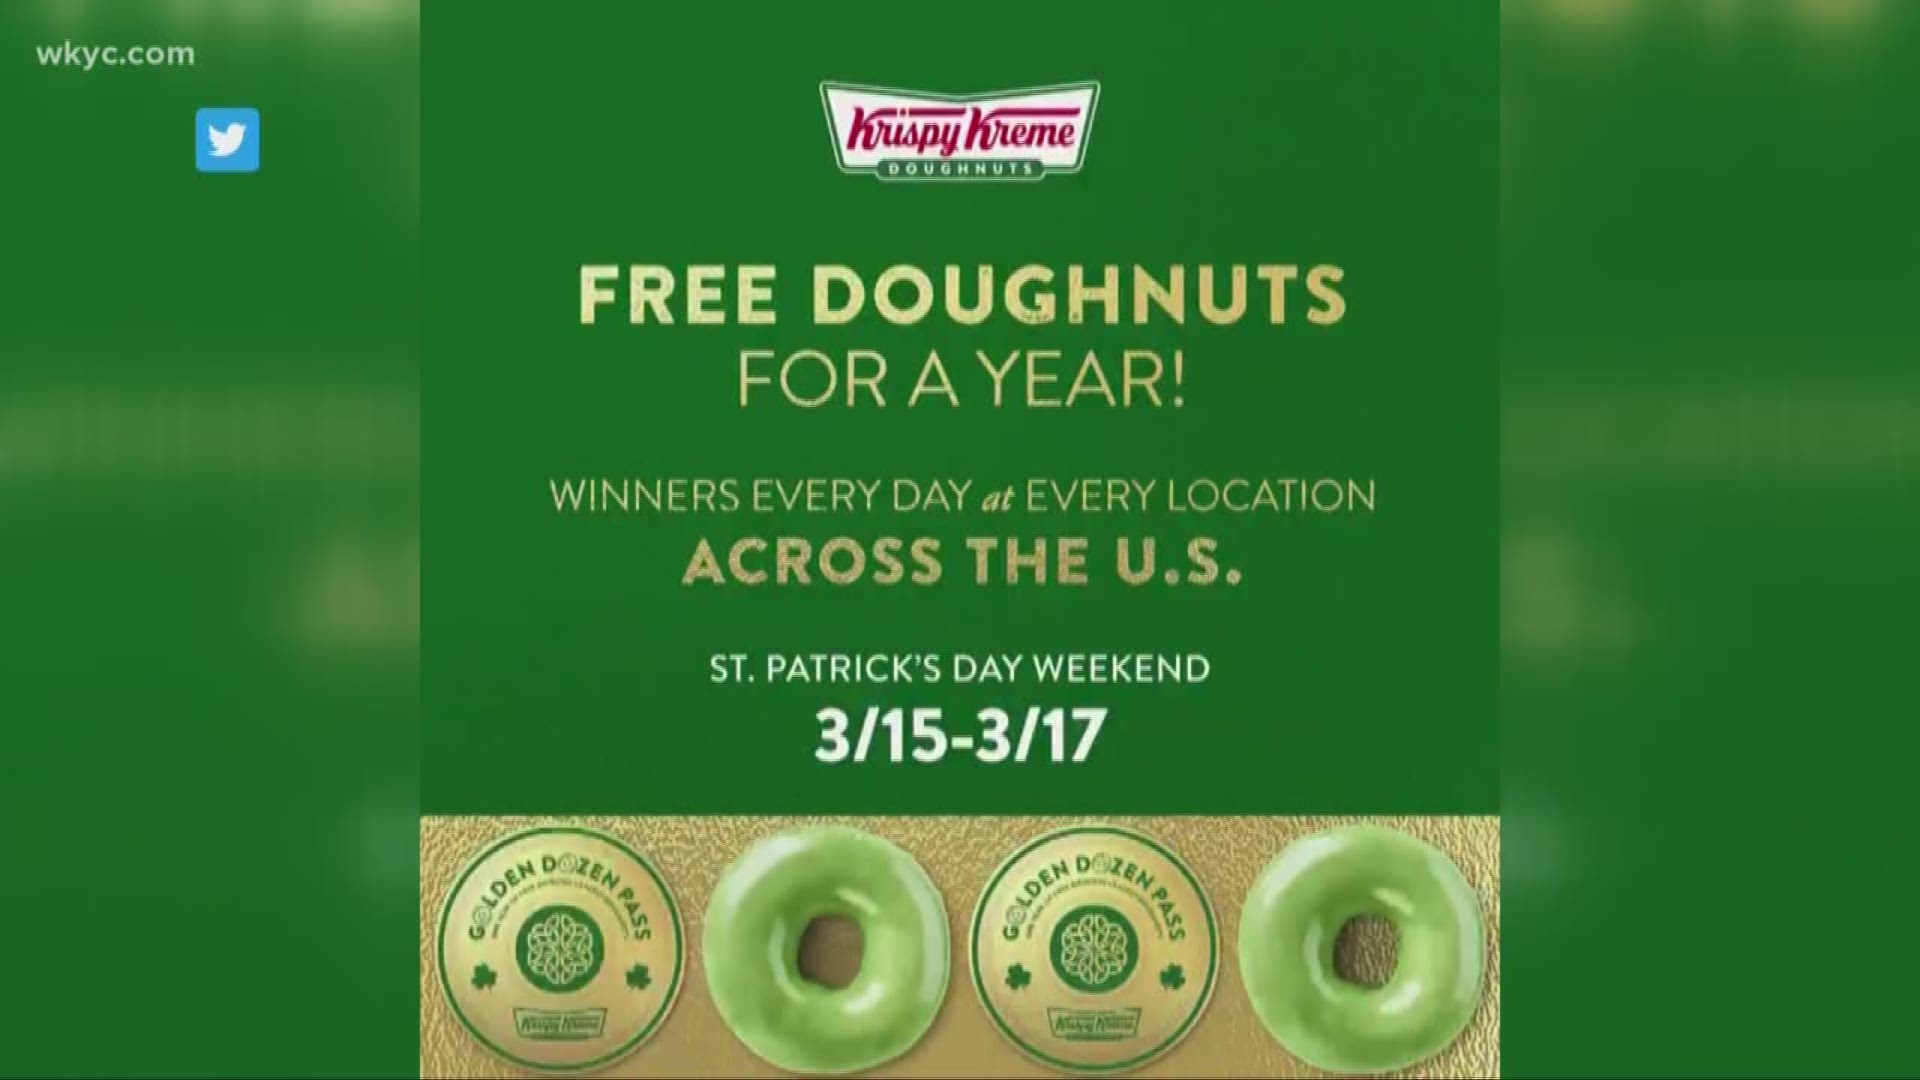 If you buy these green doughnuts, you could win free Krispy Kreme for a year